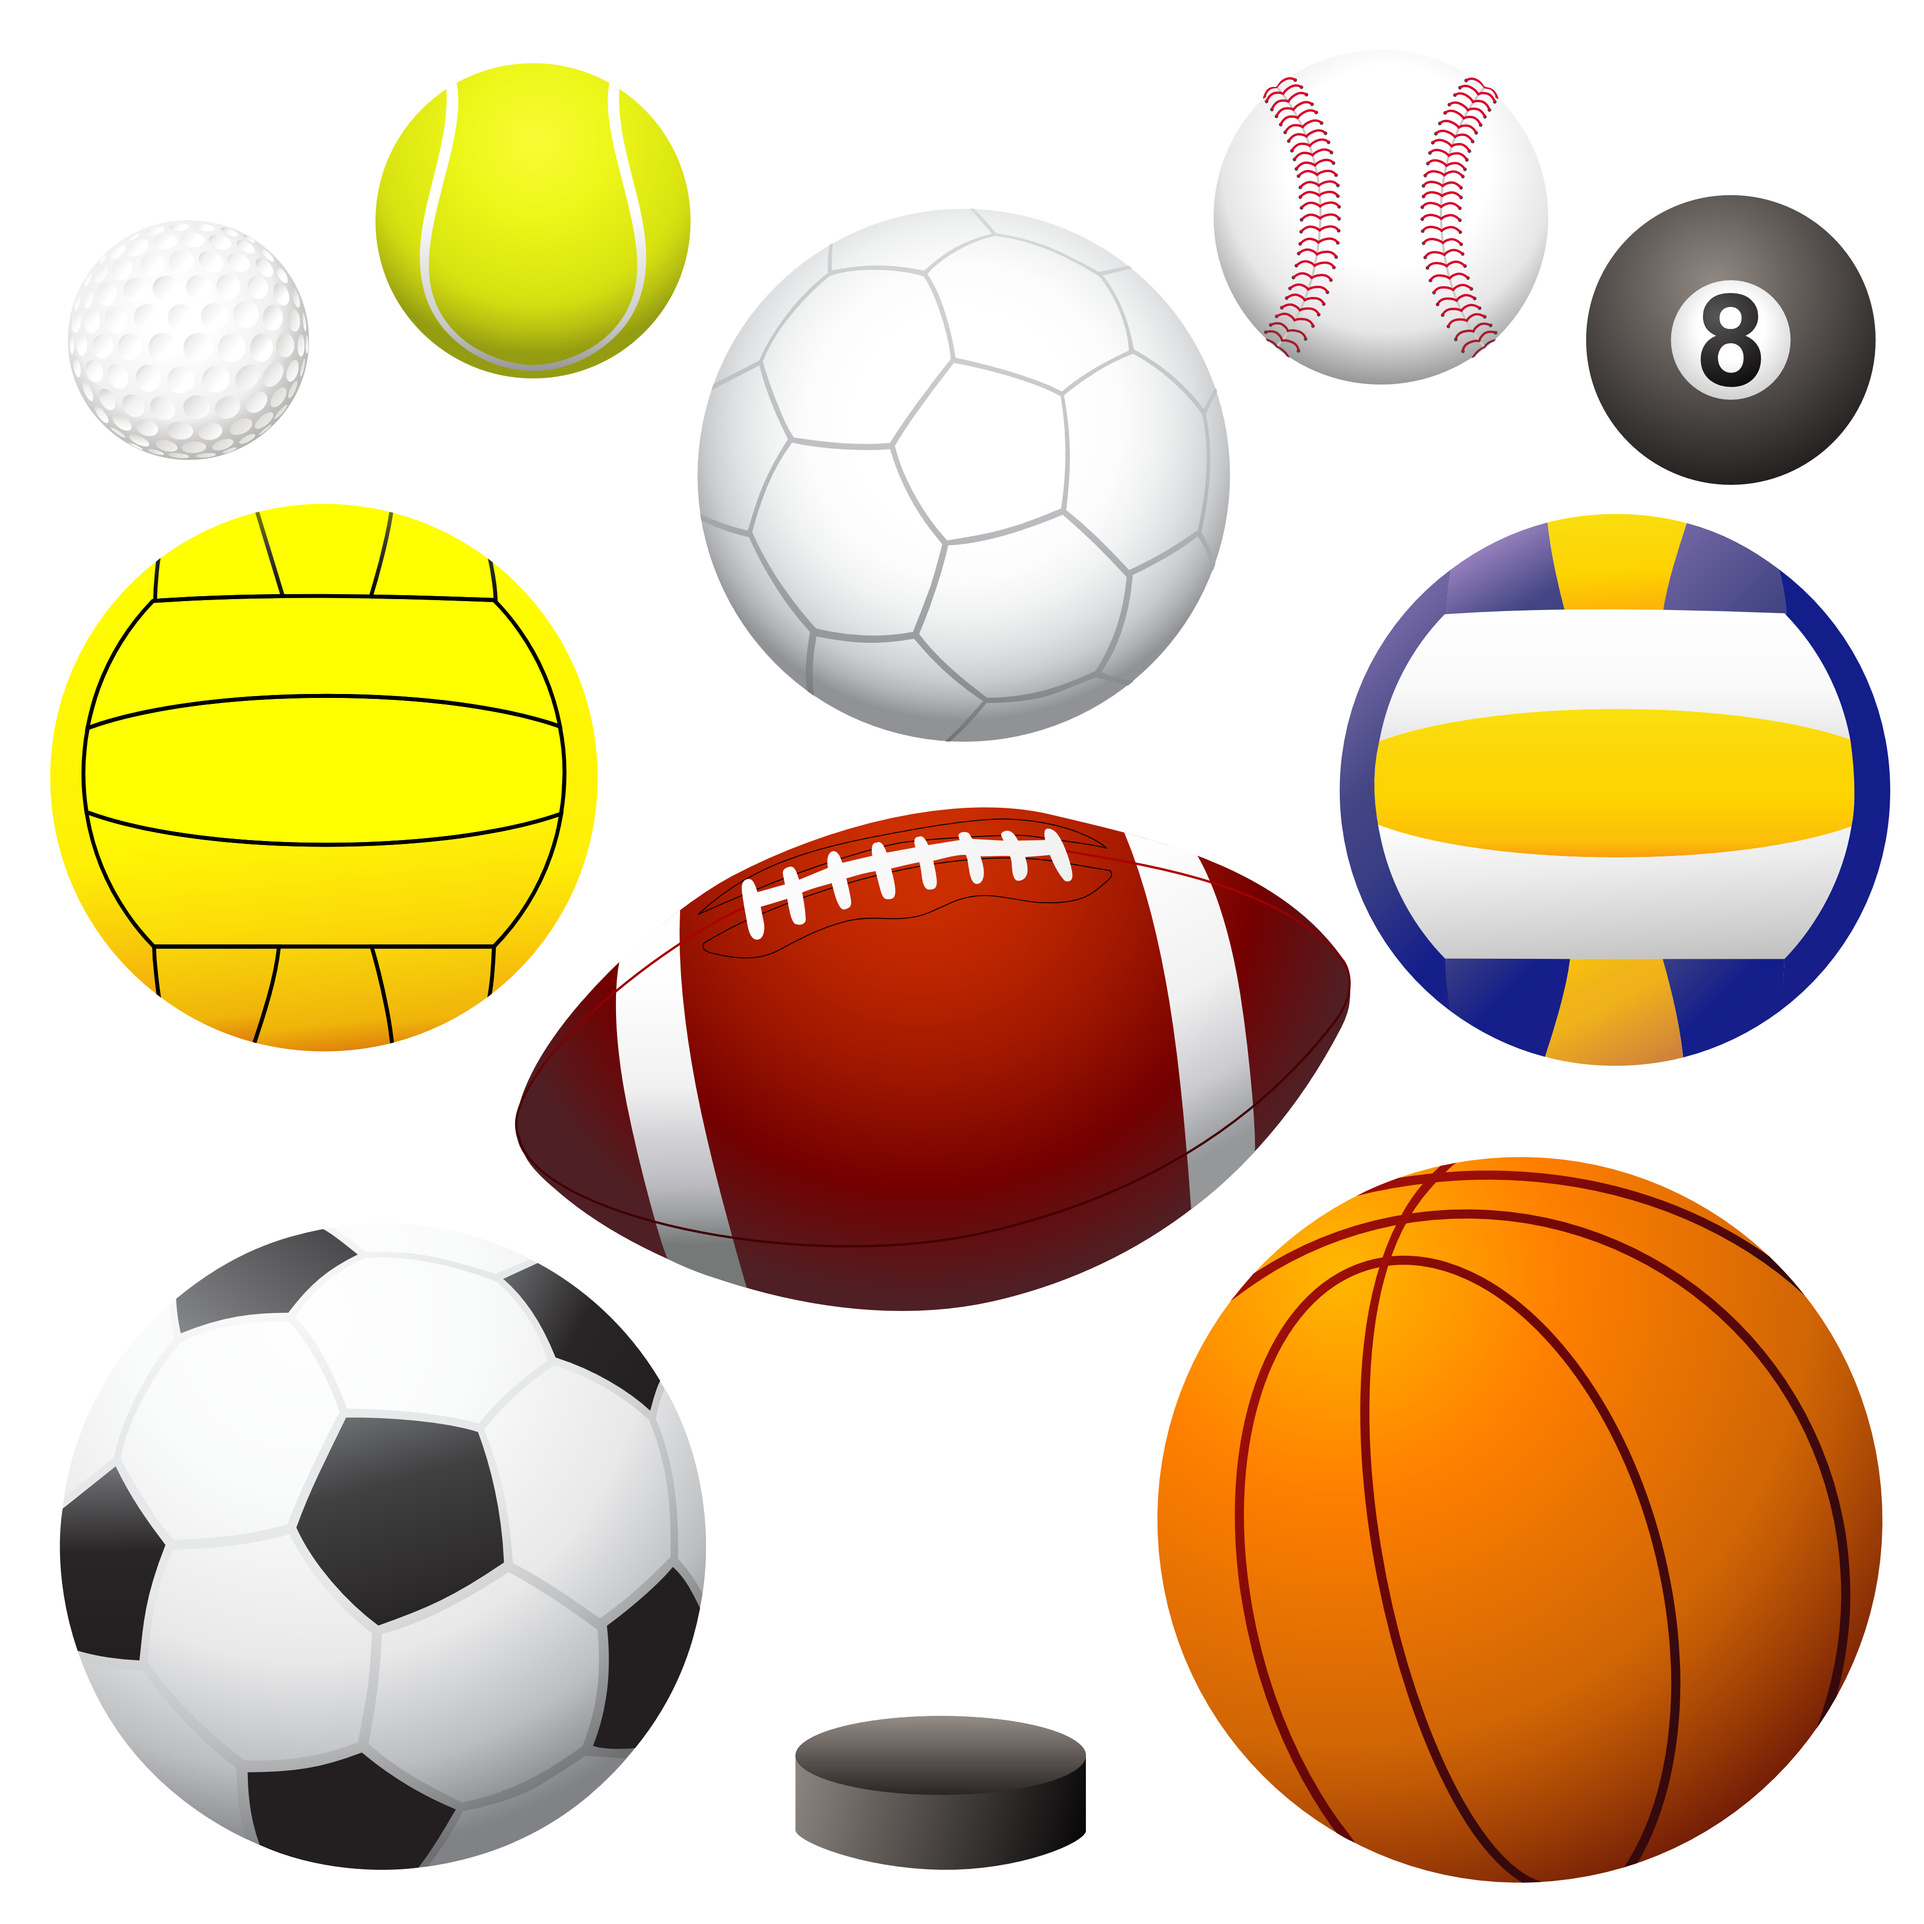 a gold ball, tennis ball, volley ball, cricket ball, snooker ball, rugby ball, basketball, football, ice hockey put on a white backgrouhnd